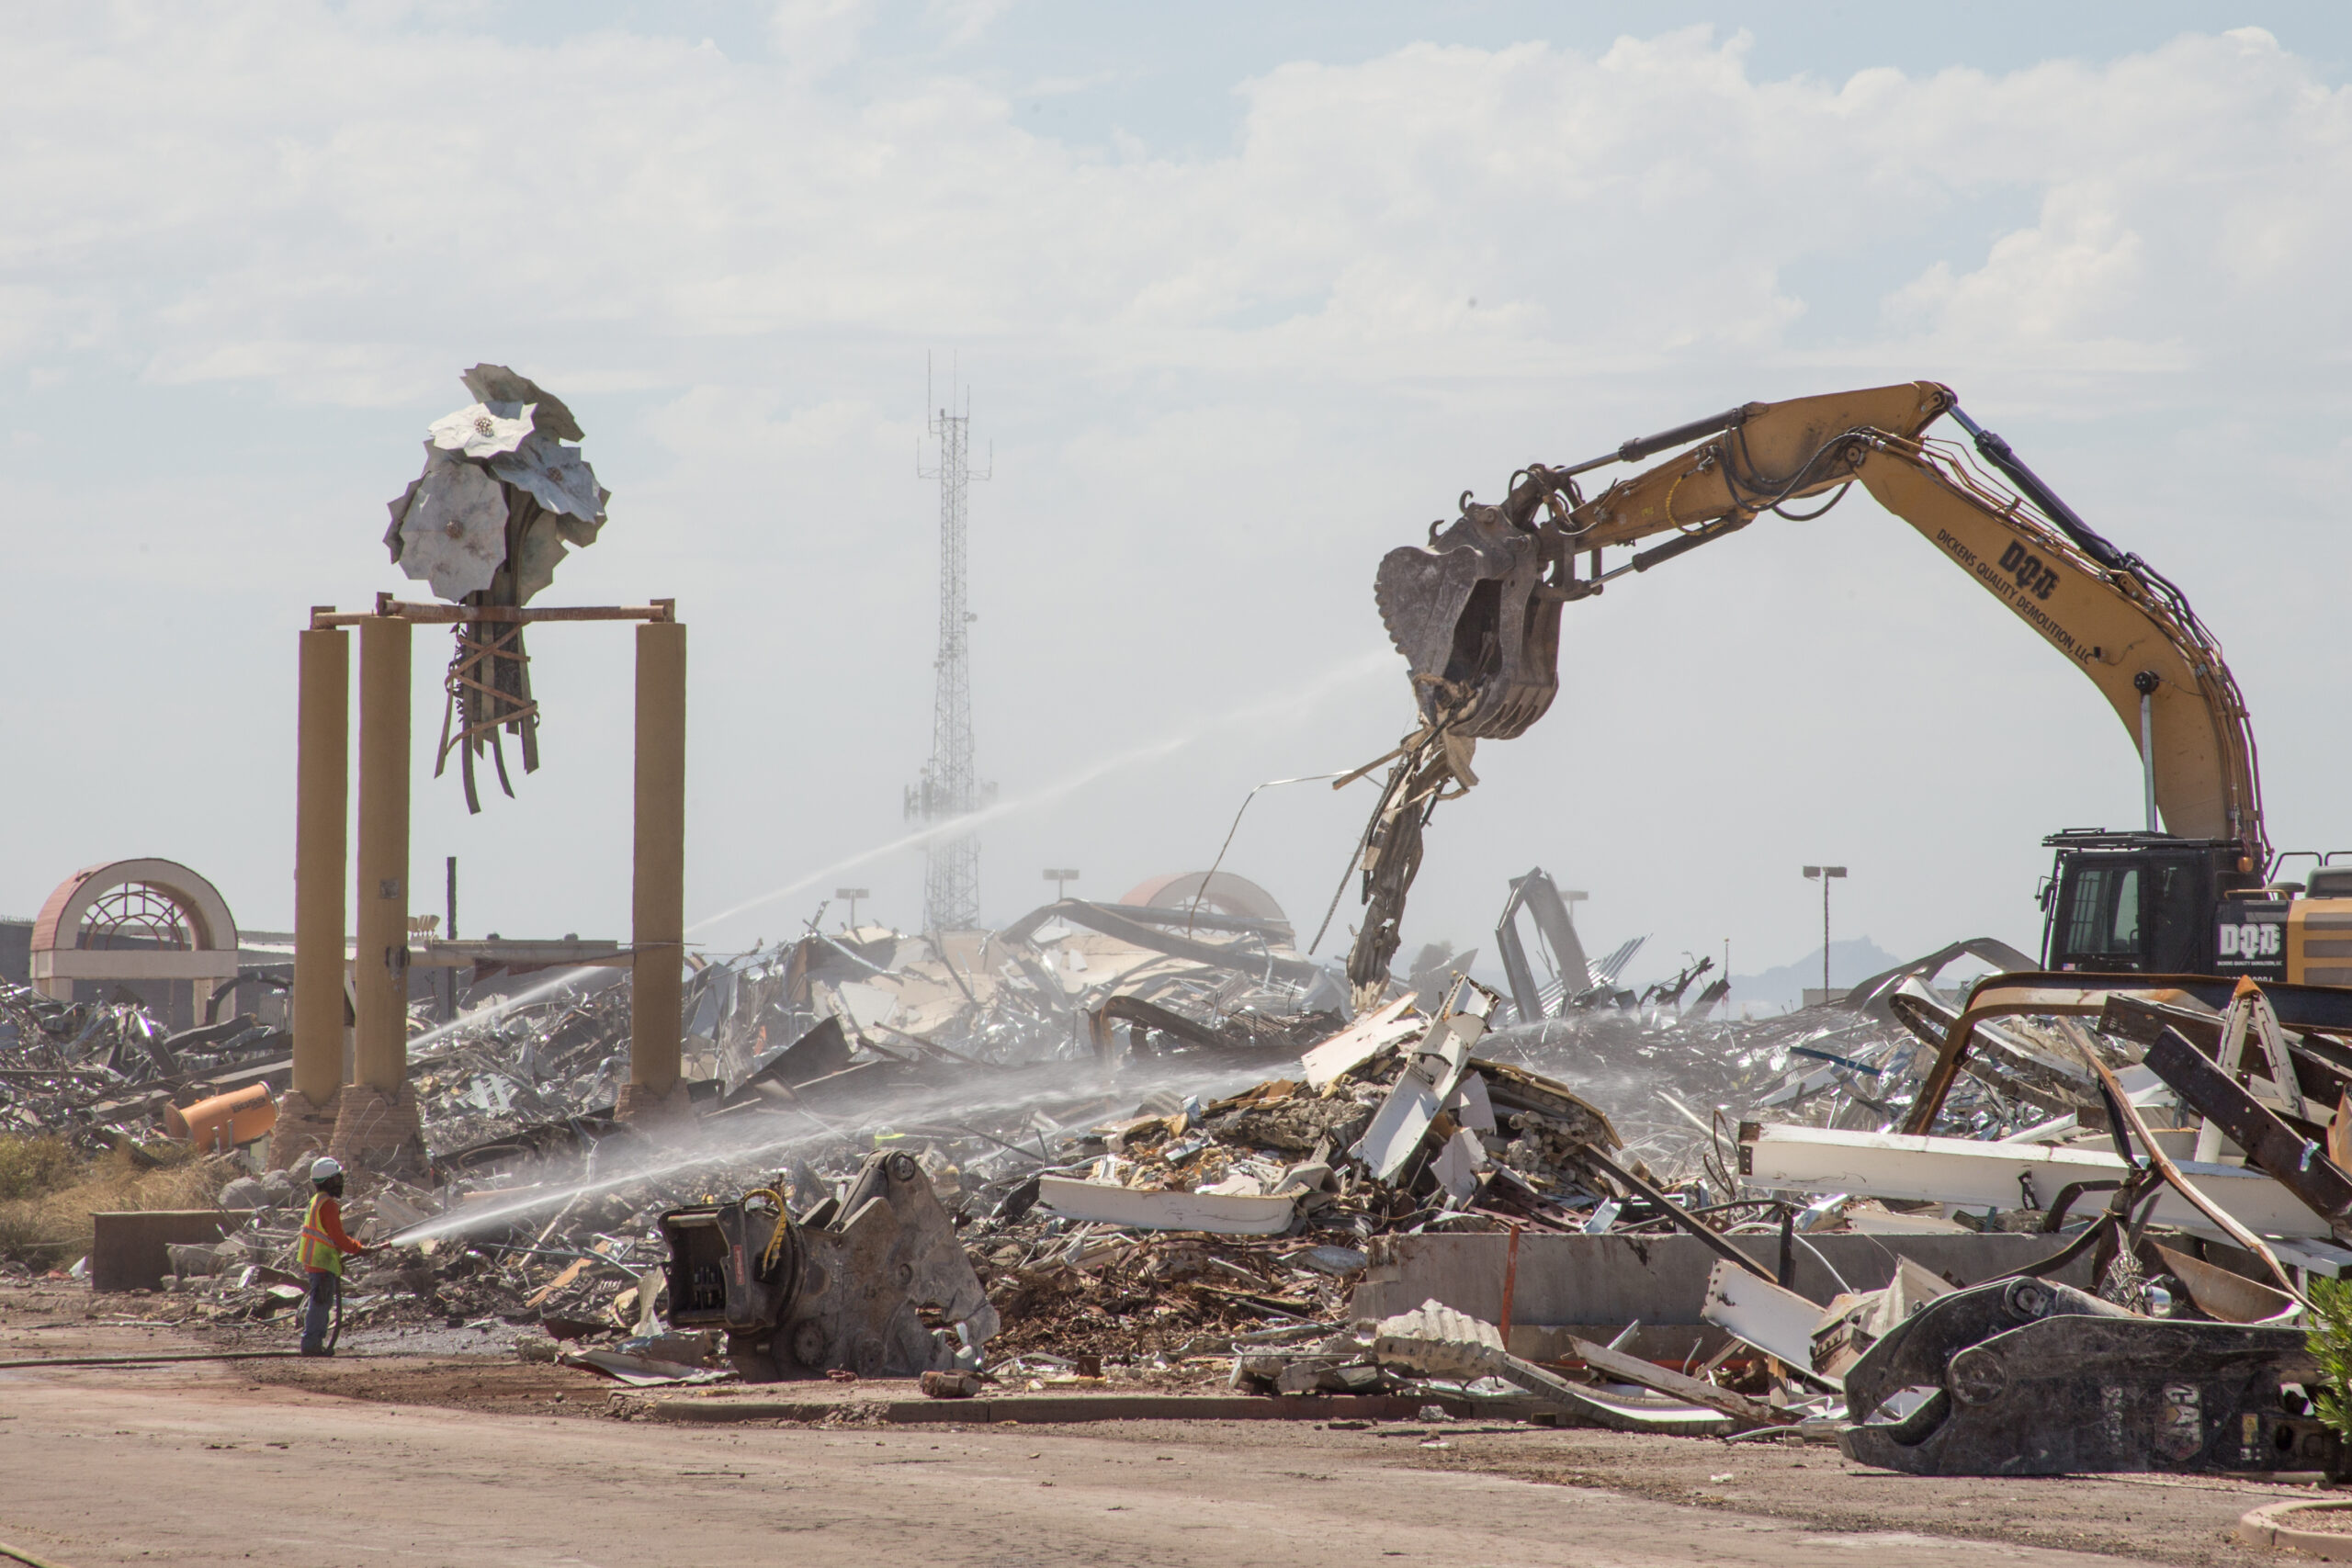 Construction crews use a water cannon to contain the dust created by an excavator demolition of Fiesta Mall in Mesa, as seen on August 31, 2023. (Photo by Rey Covarrubias Jr.)